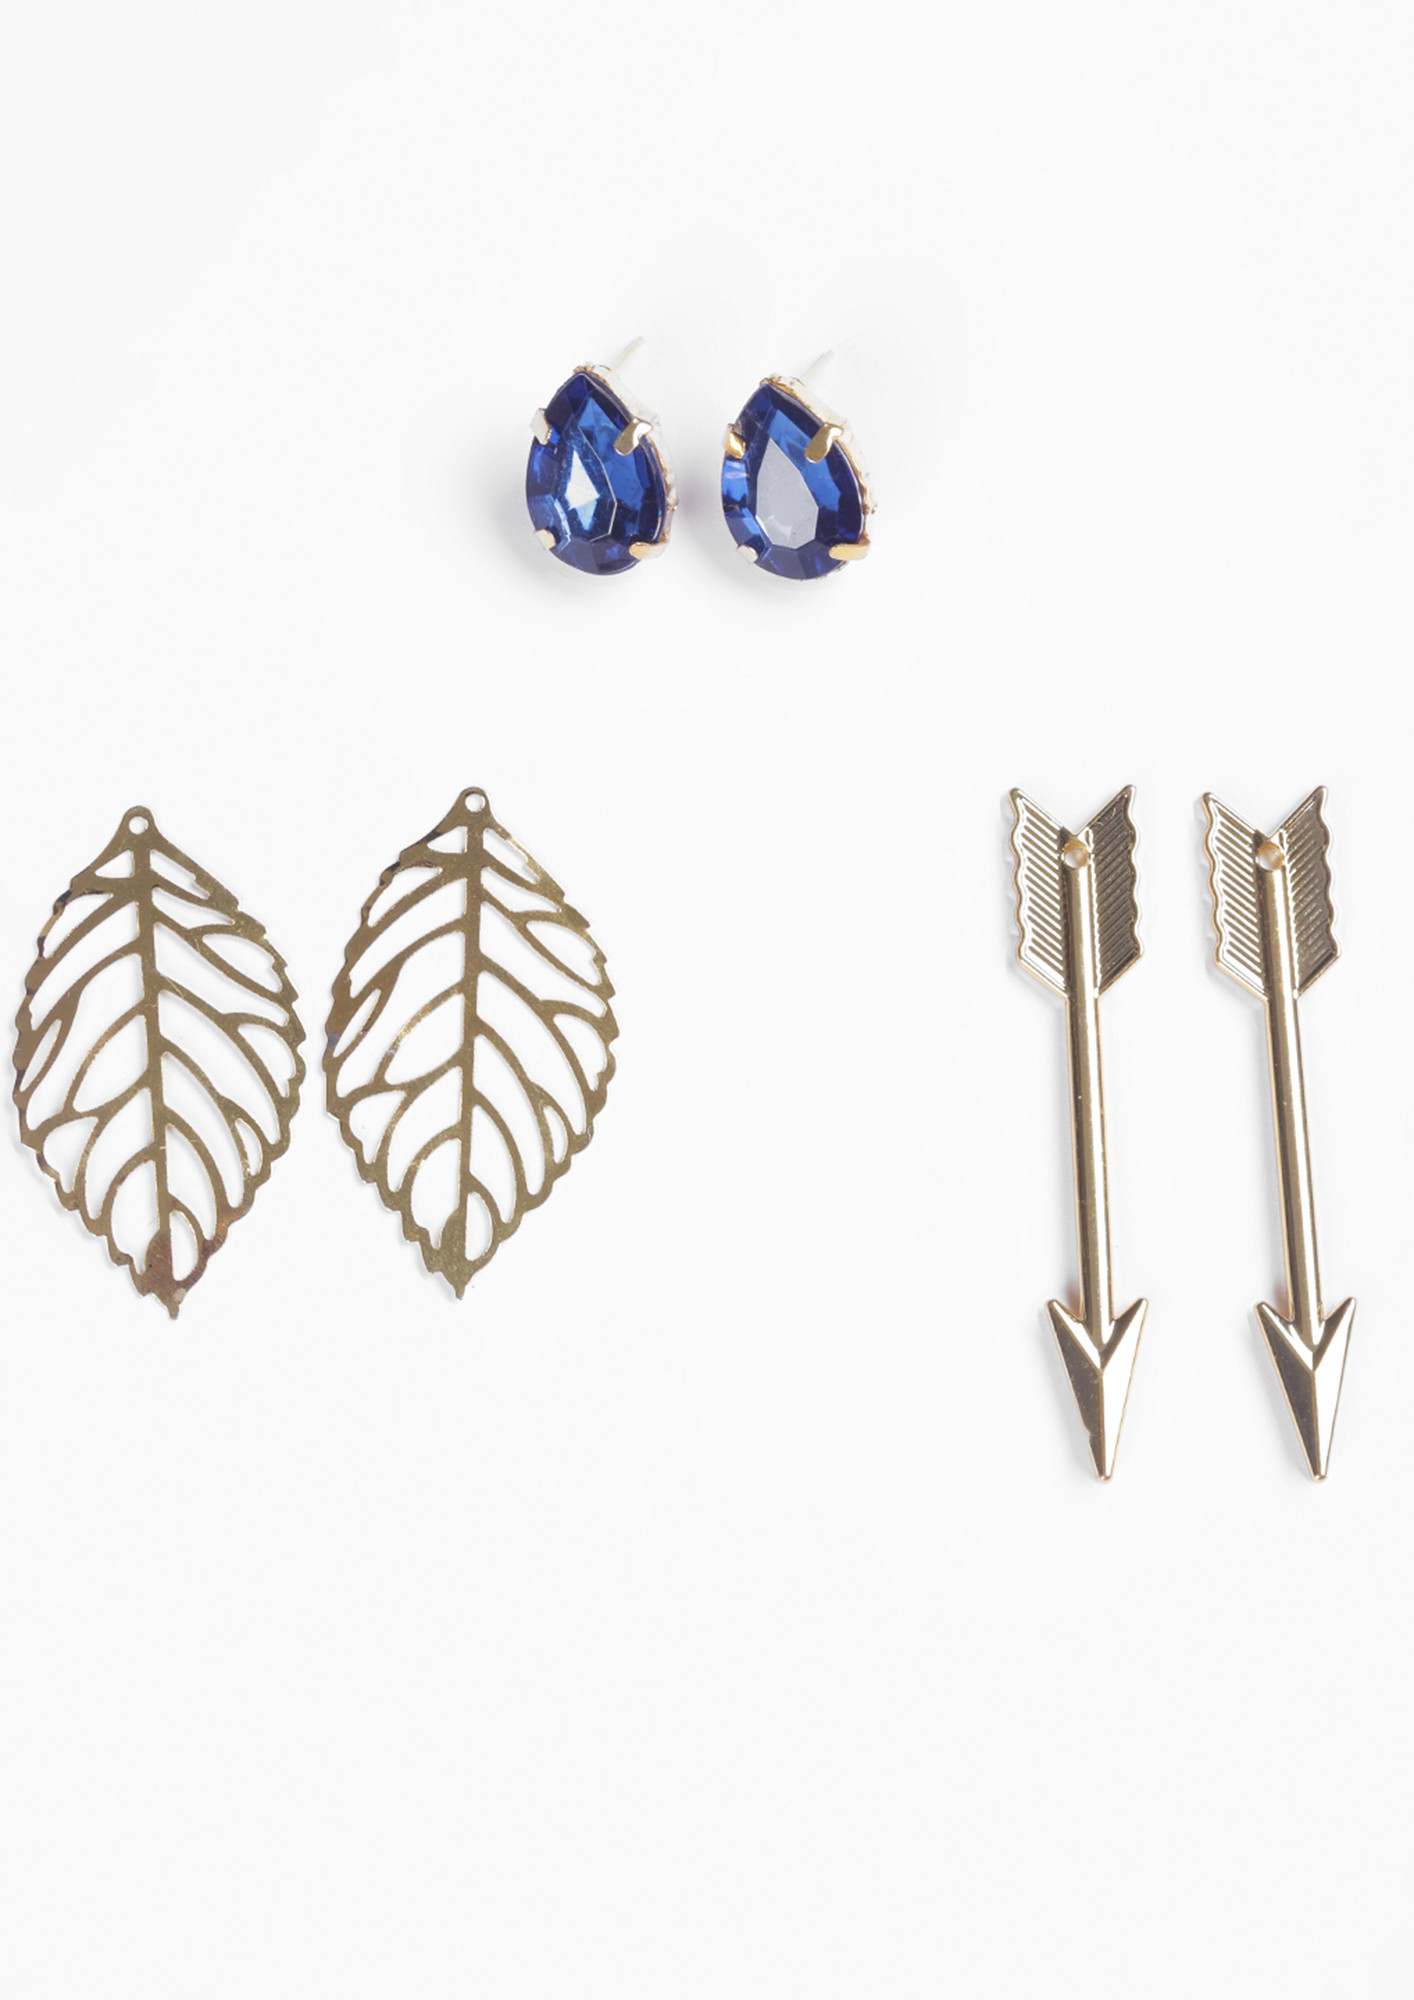 Women Gold-Plated Royal Navy Blue Reattachable 3 Earrings Set